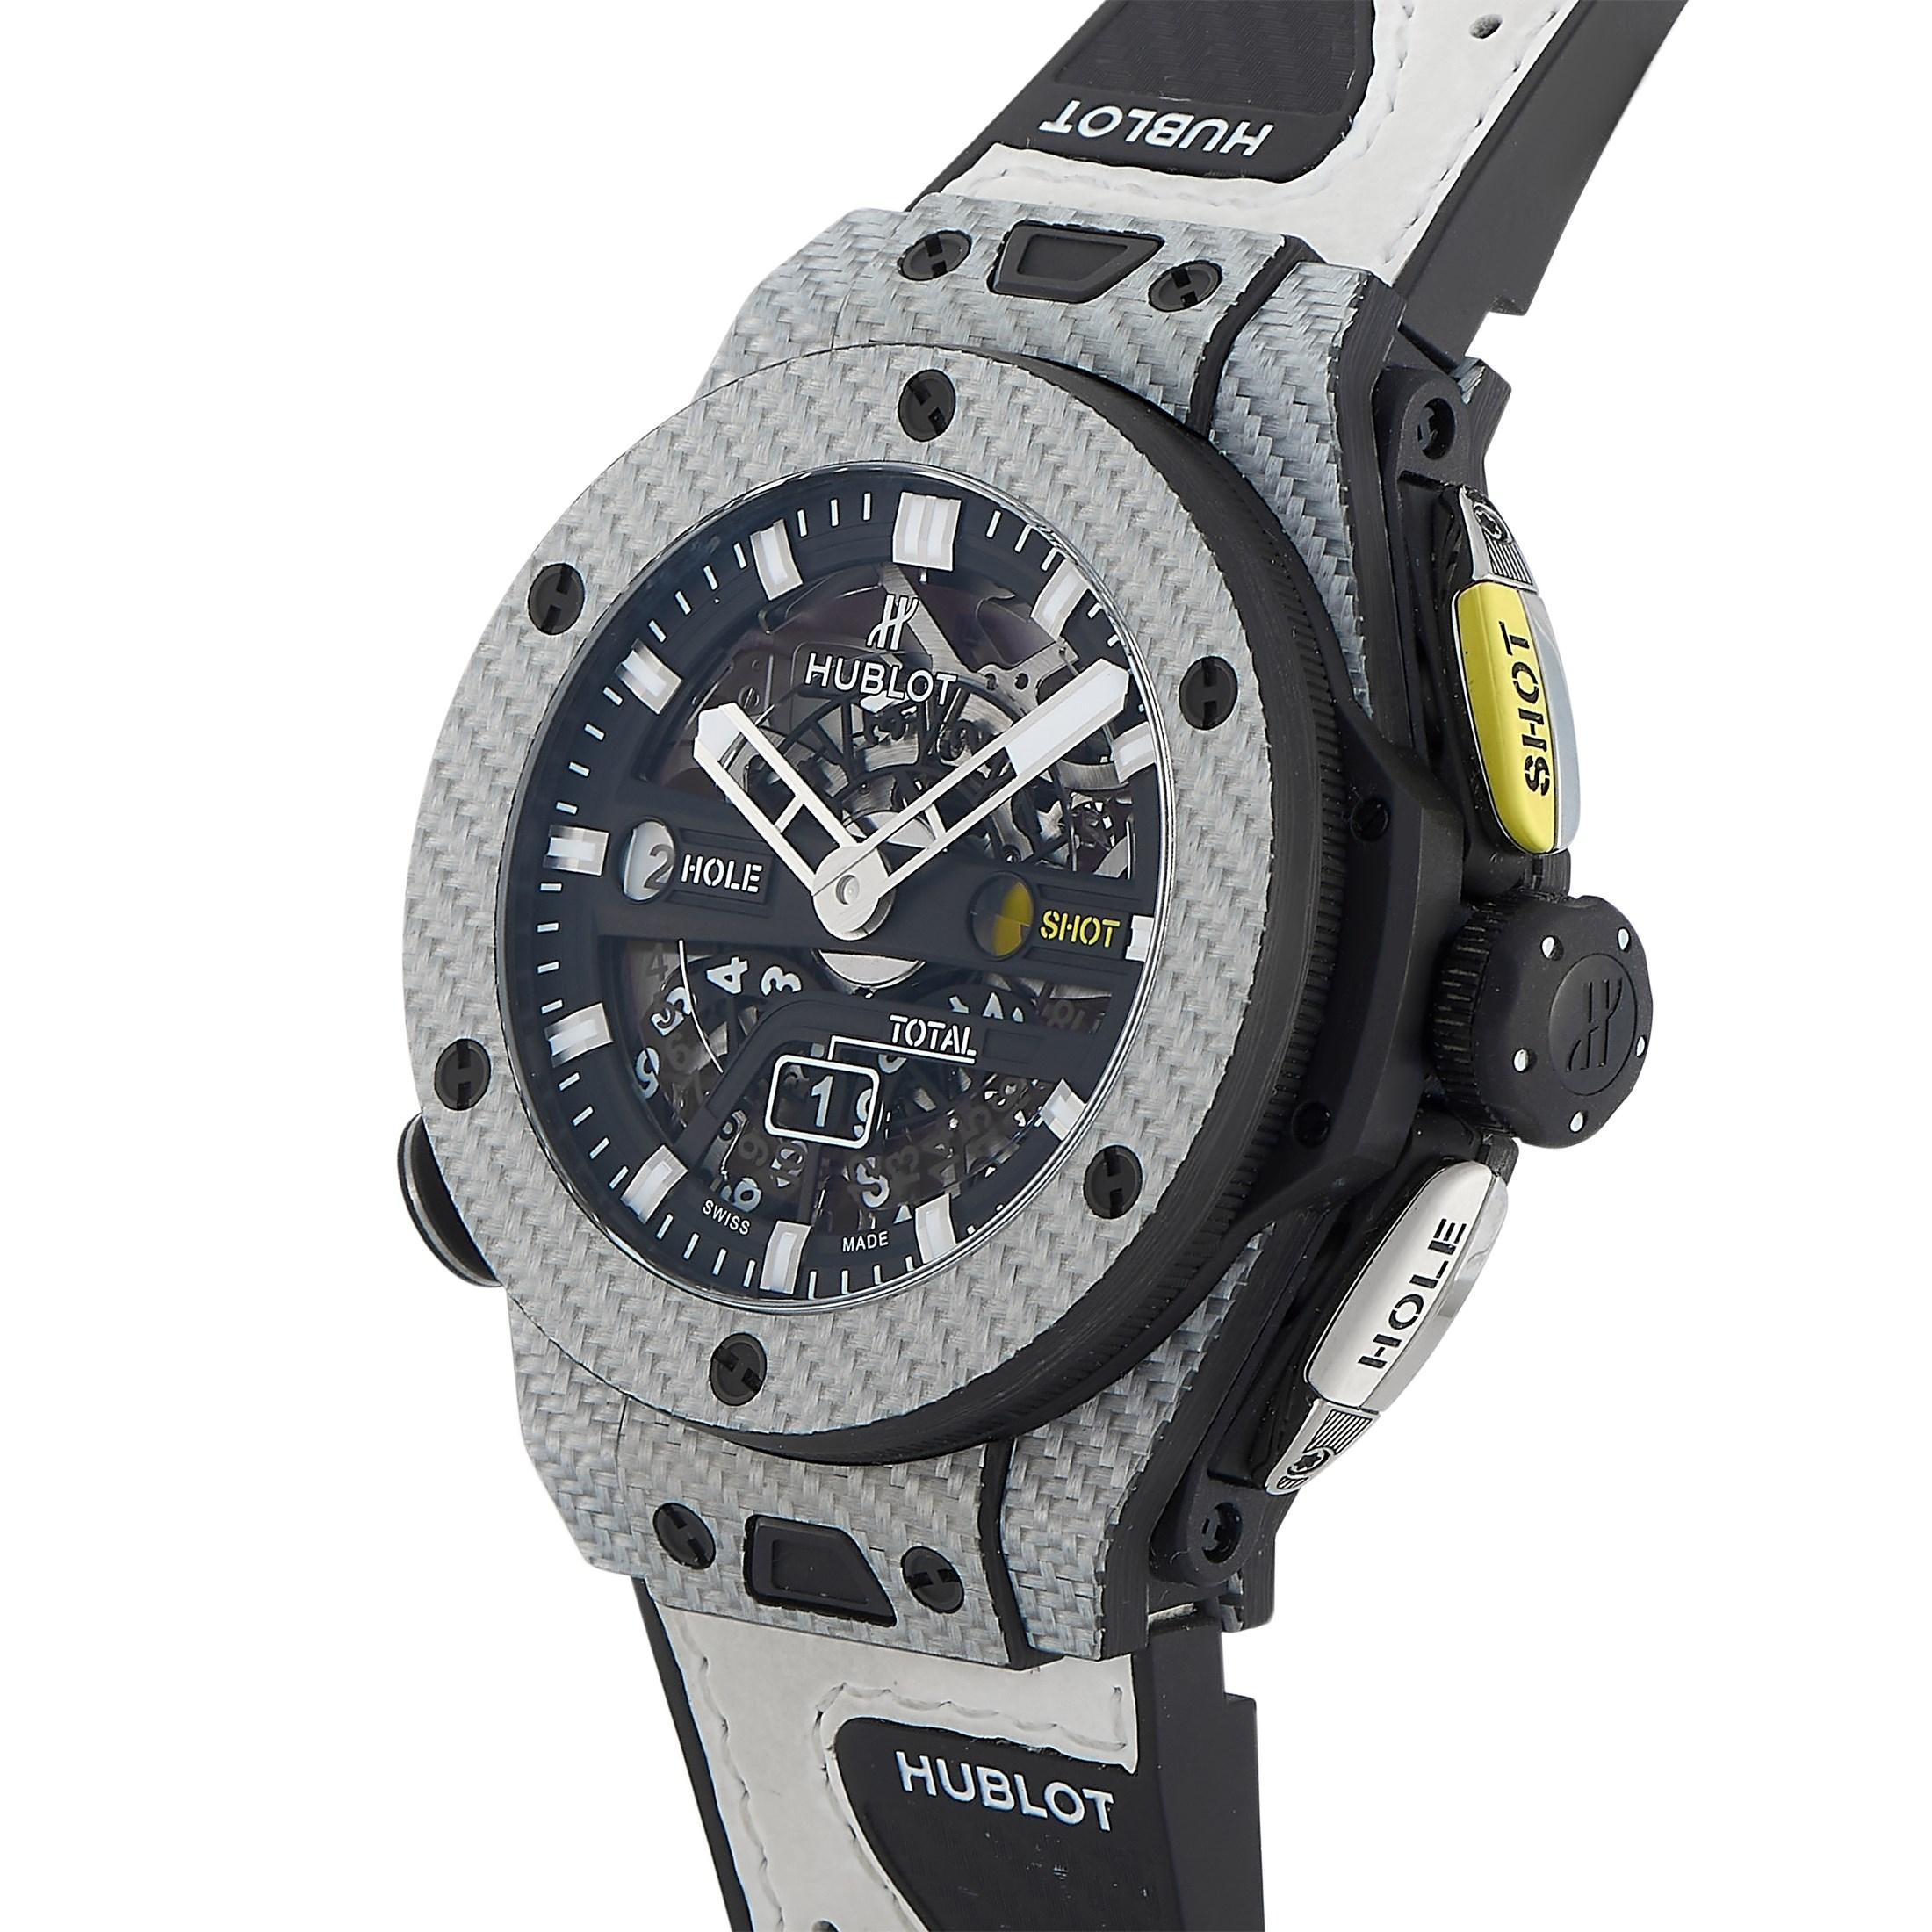 Daring in design and powerful in mechanism, the Hublot Big Bang Unico golf wristwatch is a non-traditional timepiece with quite a very specific use. Designed with a newly developed complication, the Big Bang Unico allows the wearer to keep the score